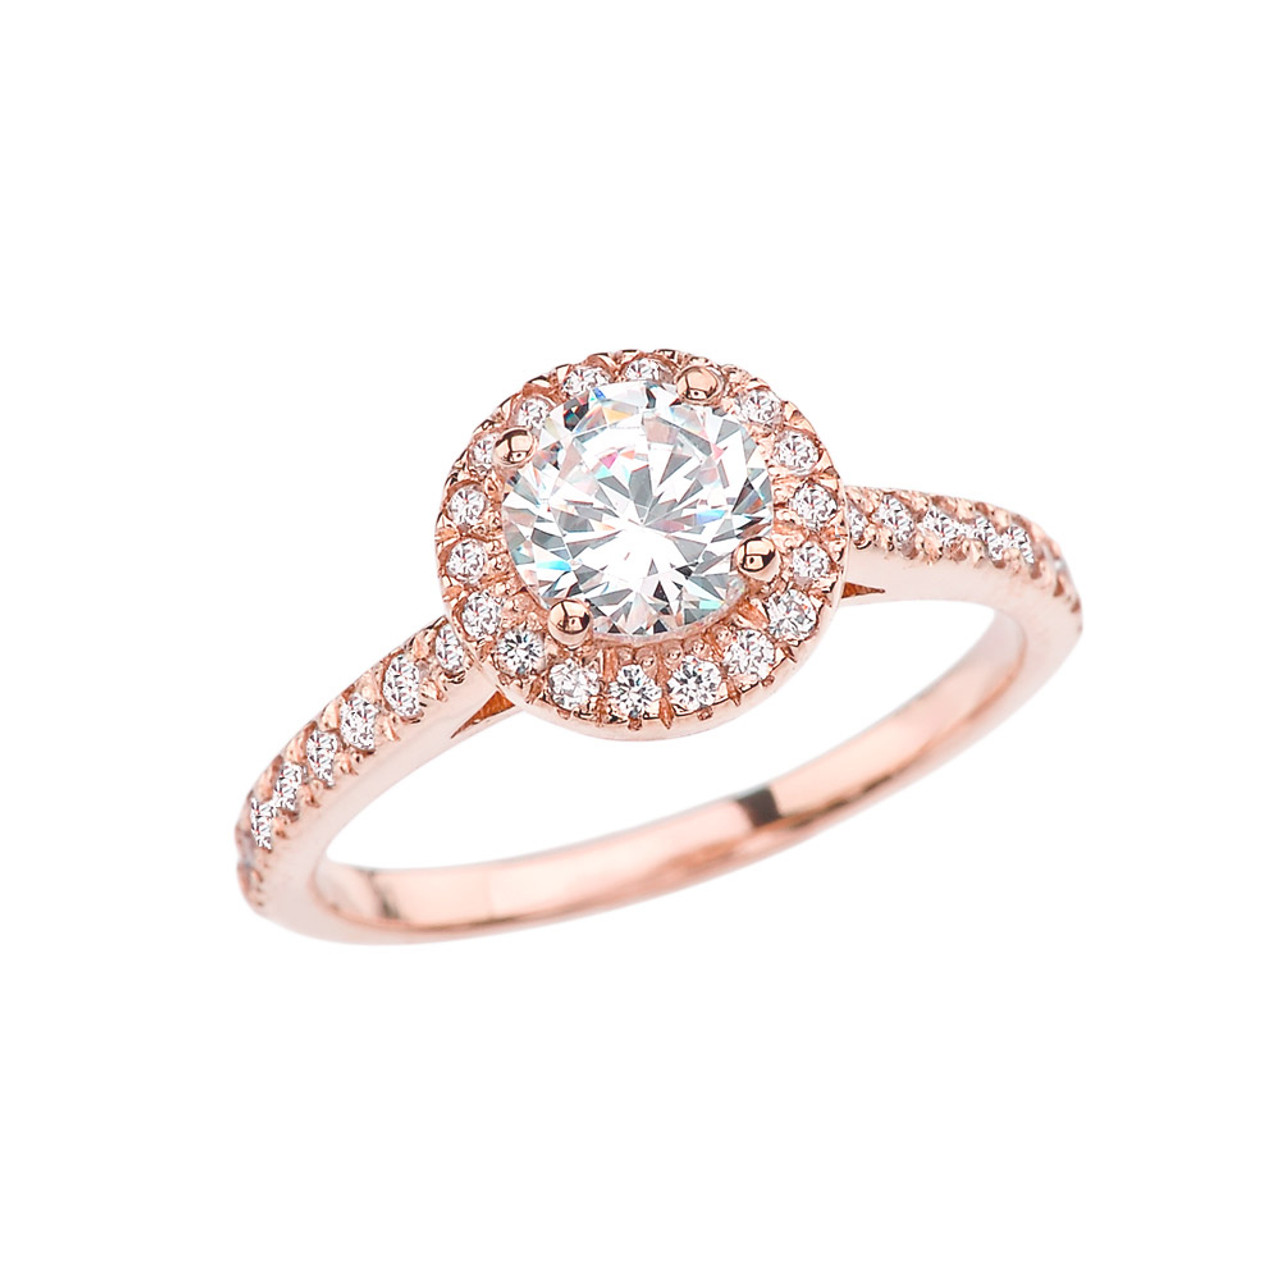  Rose  Gold  Halo  Engagement  Proposal Ring  With Cubic Zirconia